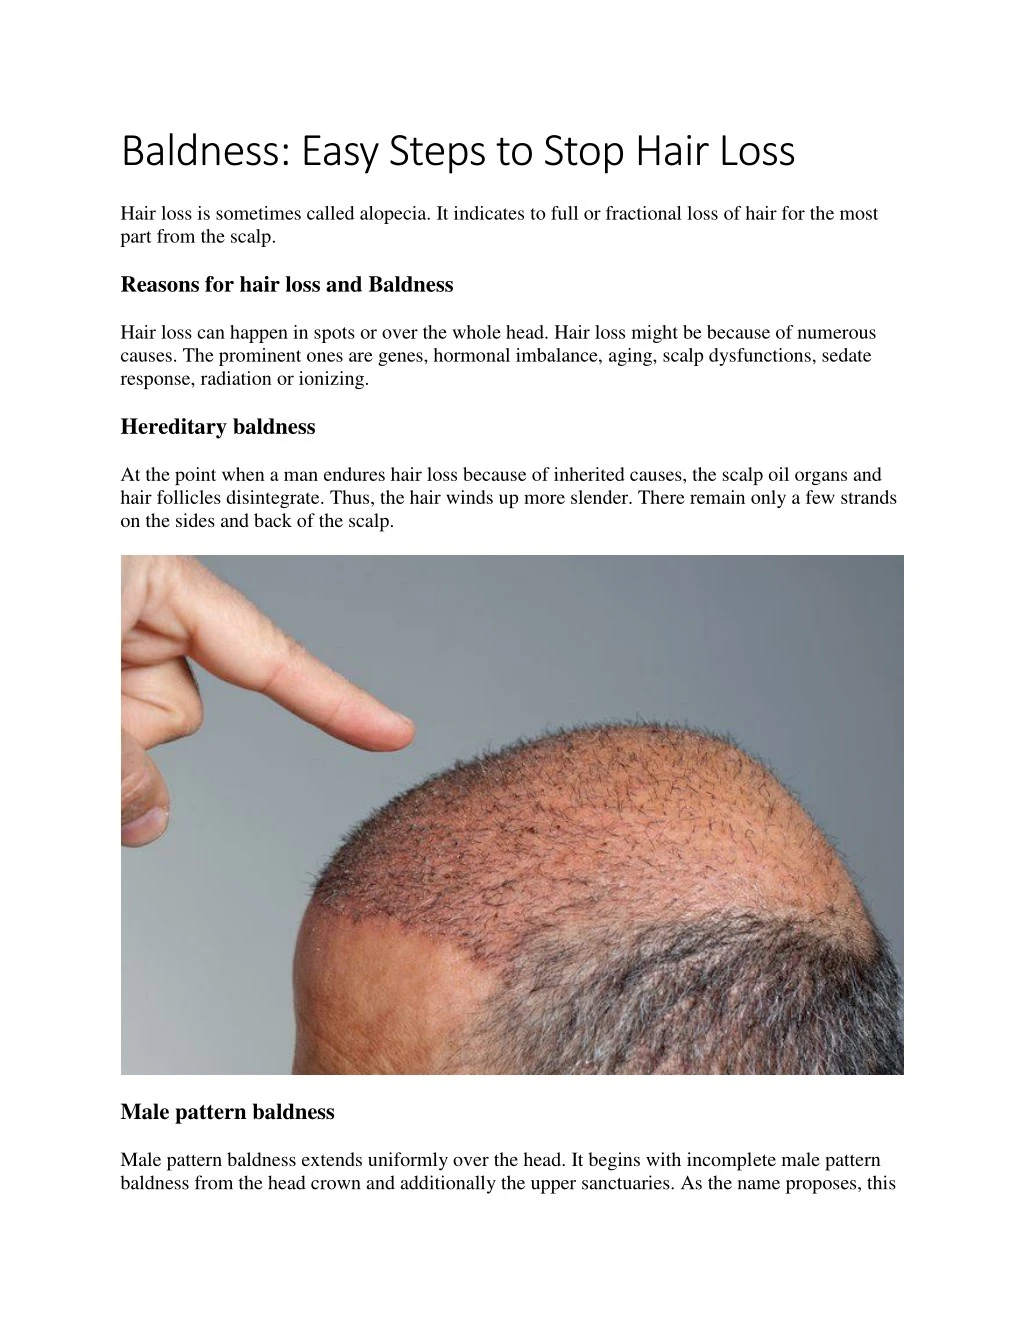 baldness easy steps to stop hair loss